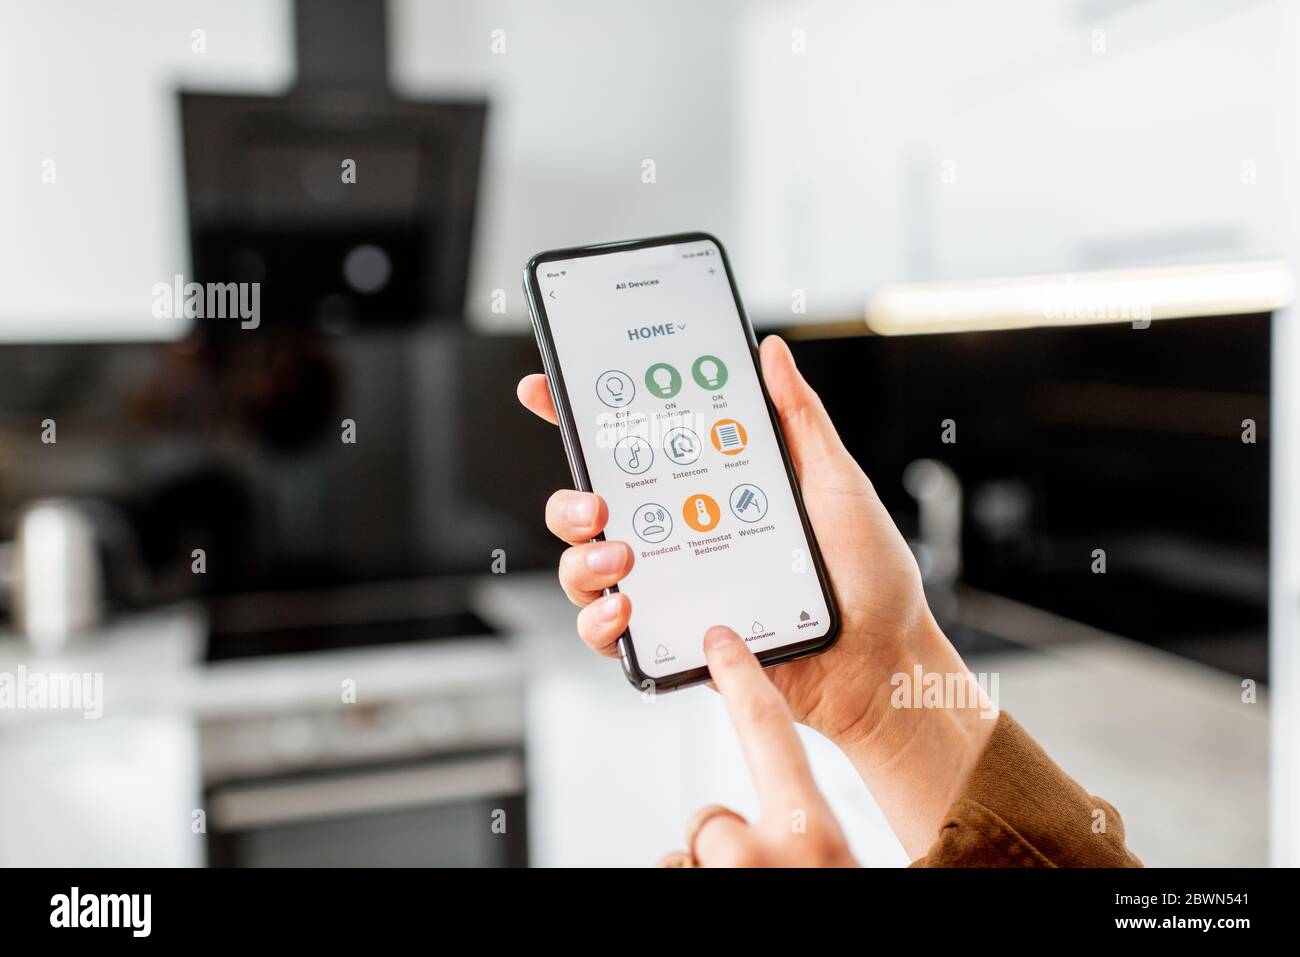 Woman controlling kitchen appliances with a smart phone, close-up on mobile device with launched smart home application. Smart home concept Stock Photo